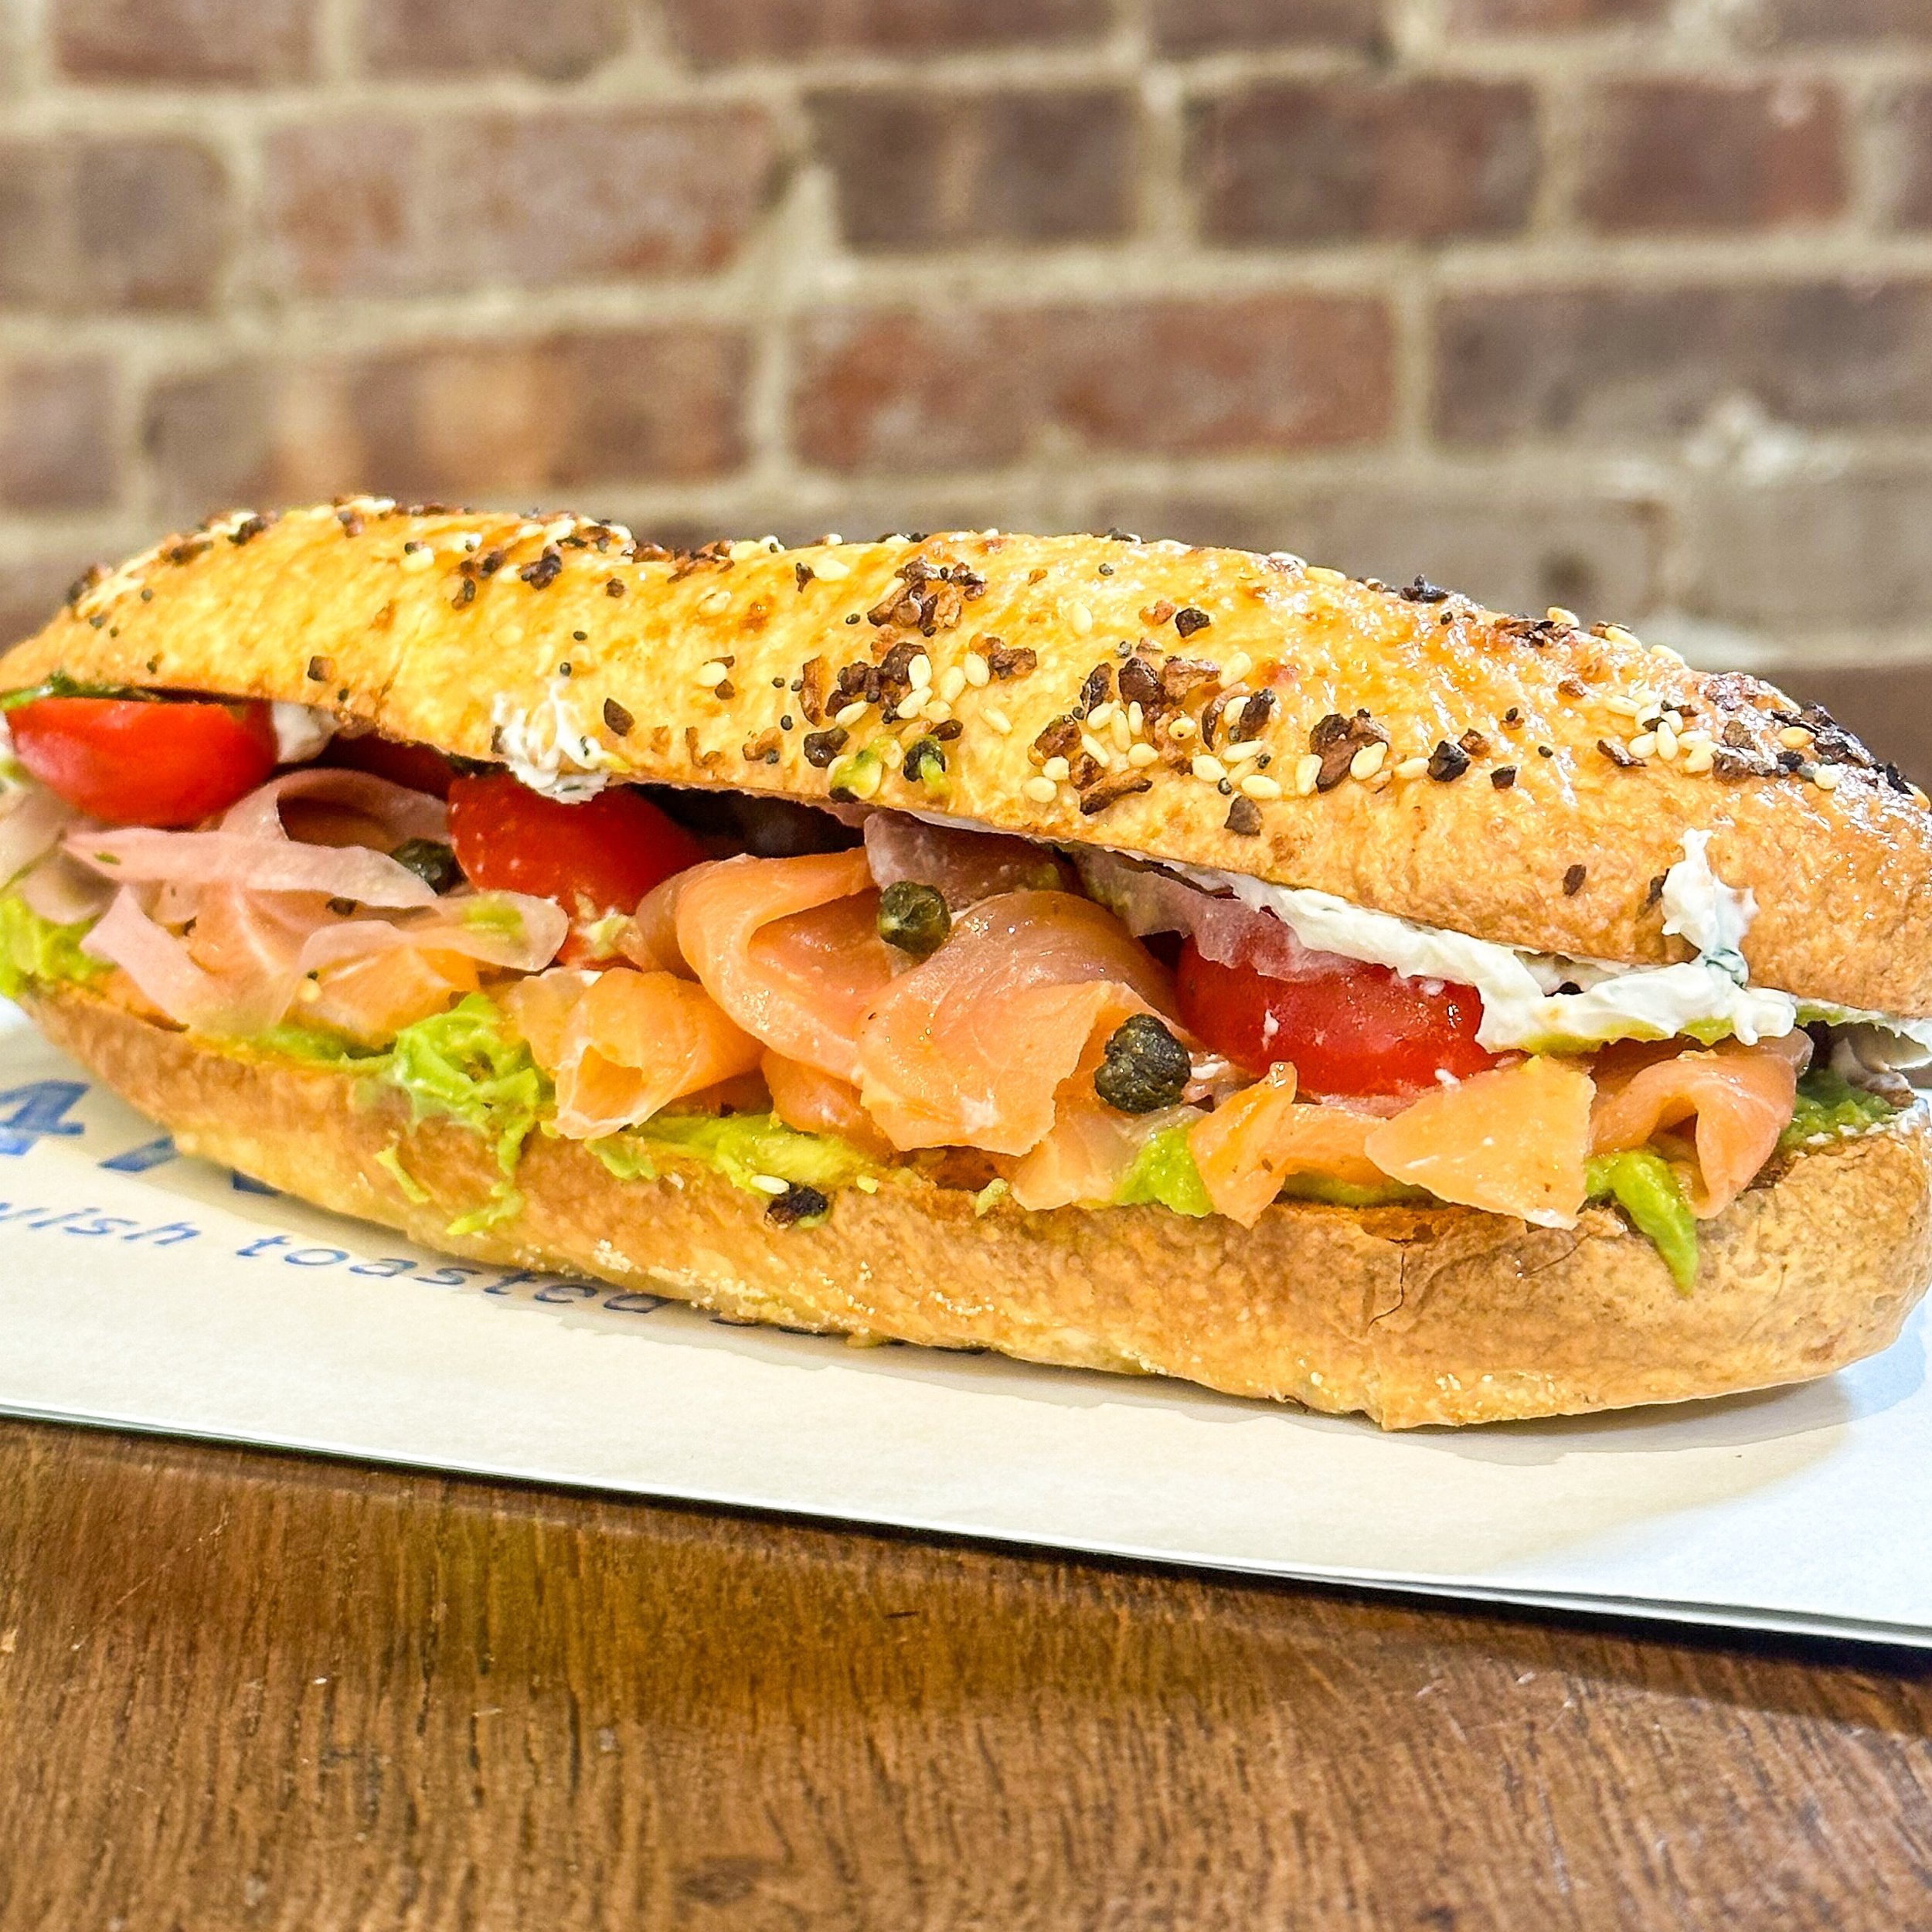 introducing The Everything HOAGEL! our hoagie x bagel crossover has the fluffiness of our signature sub rolls with the chewy magic of an everything bagel, which is toasted and then filled with our own smoked salmon, avocado mash, pickled red onions, 